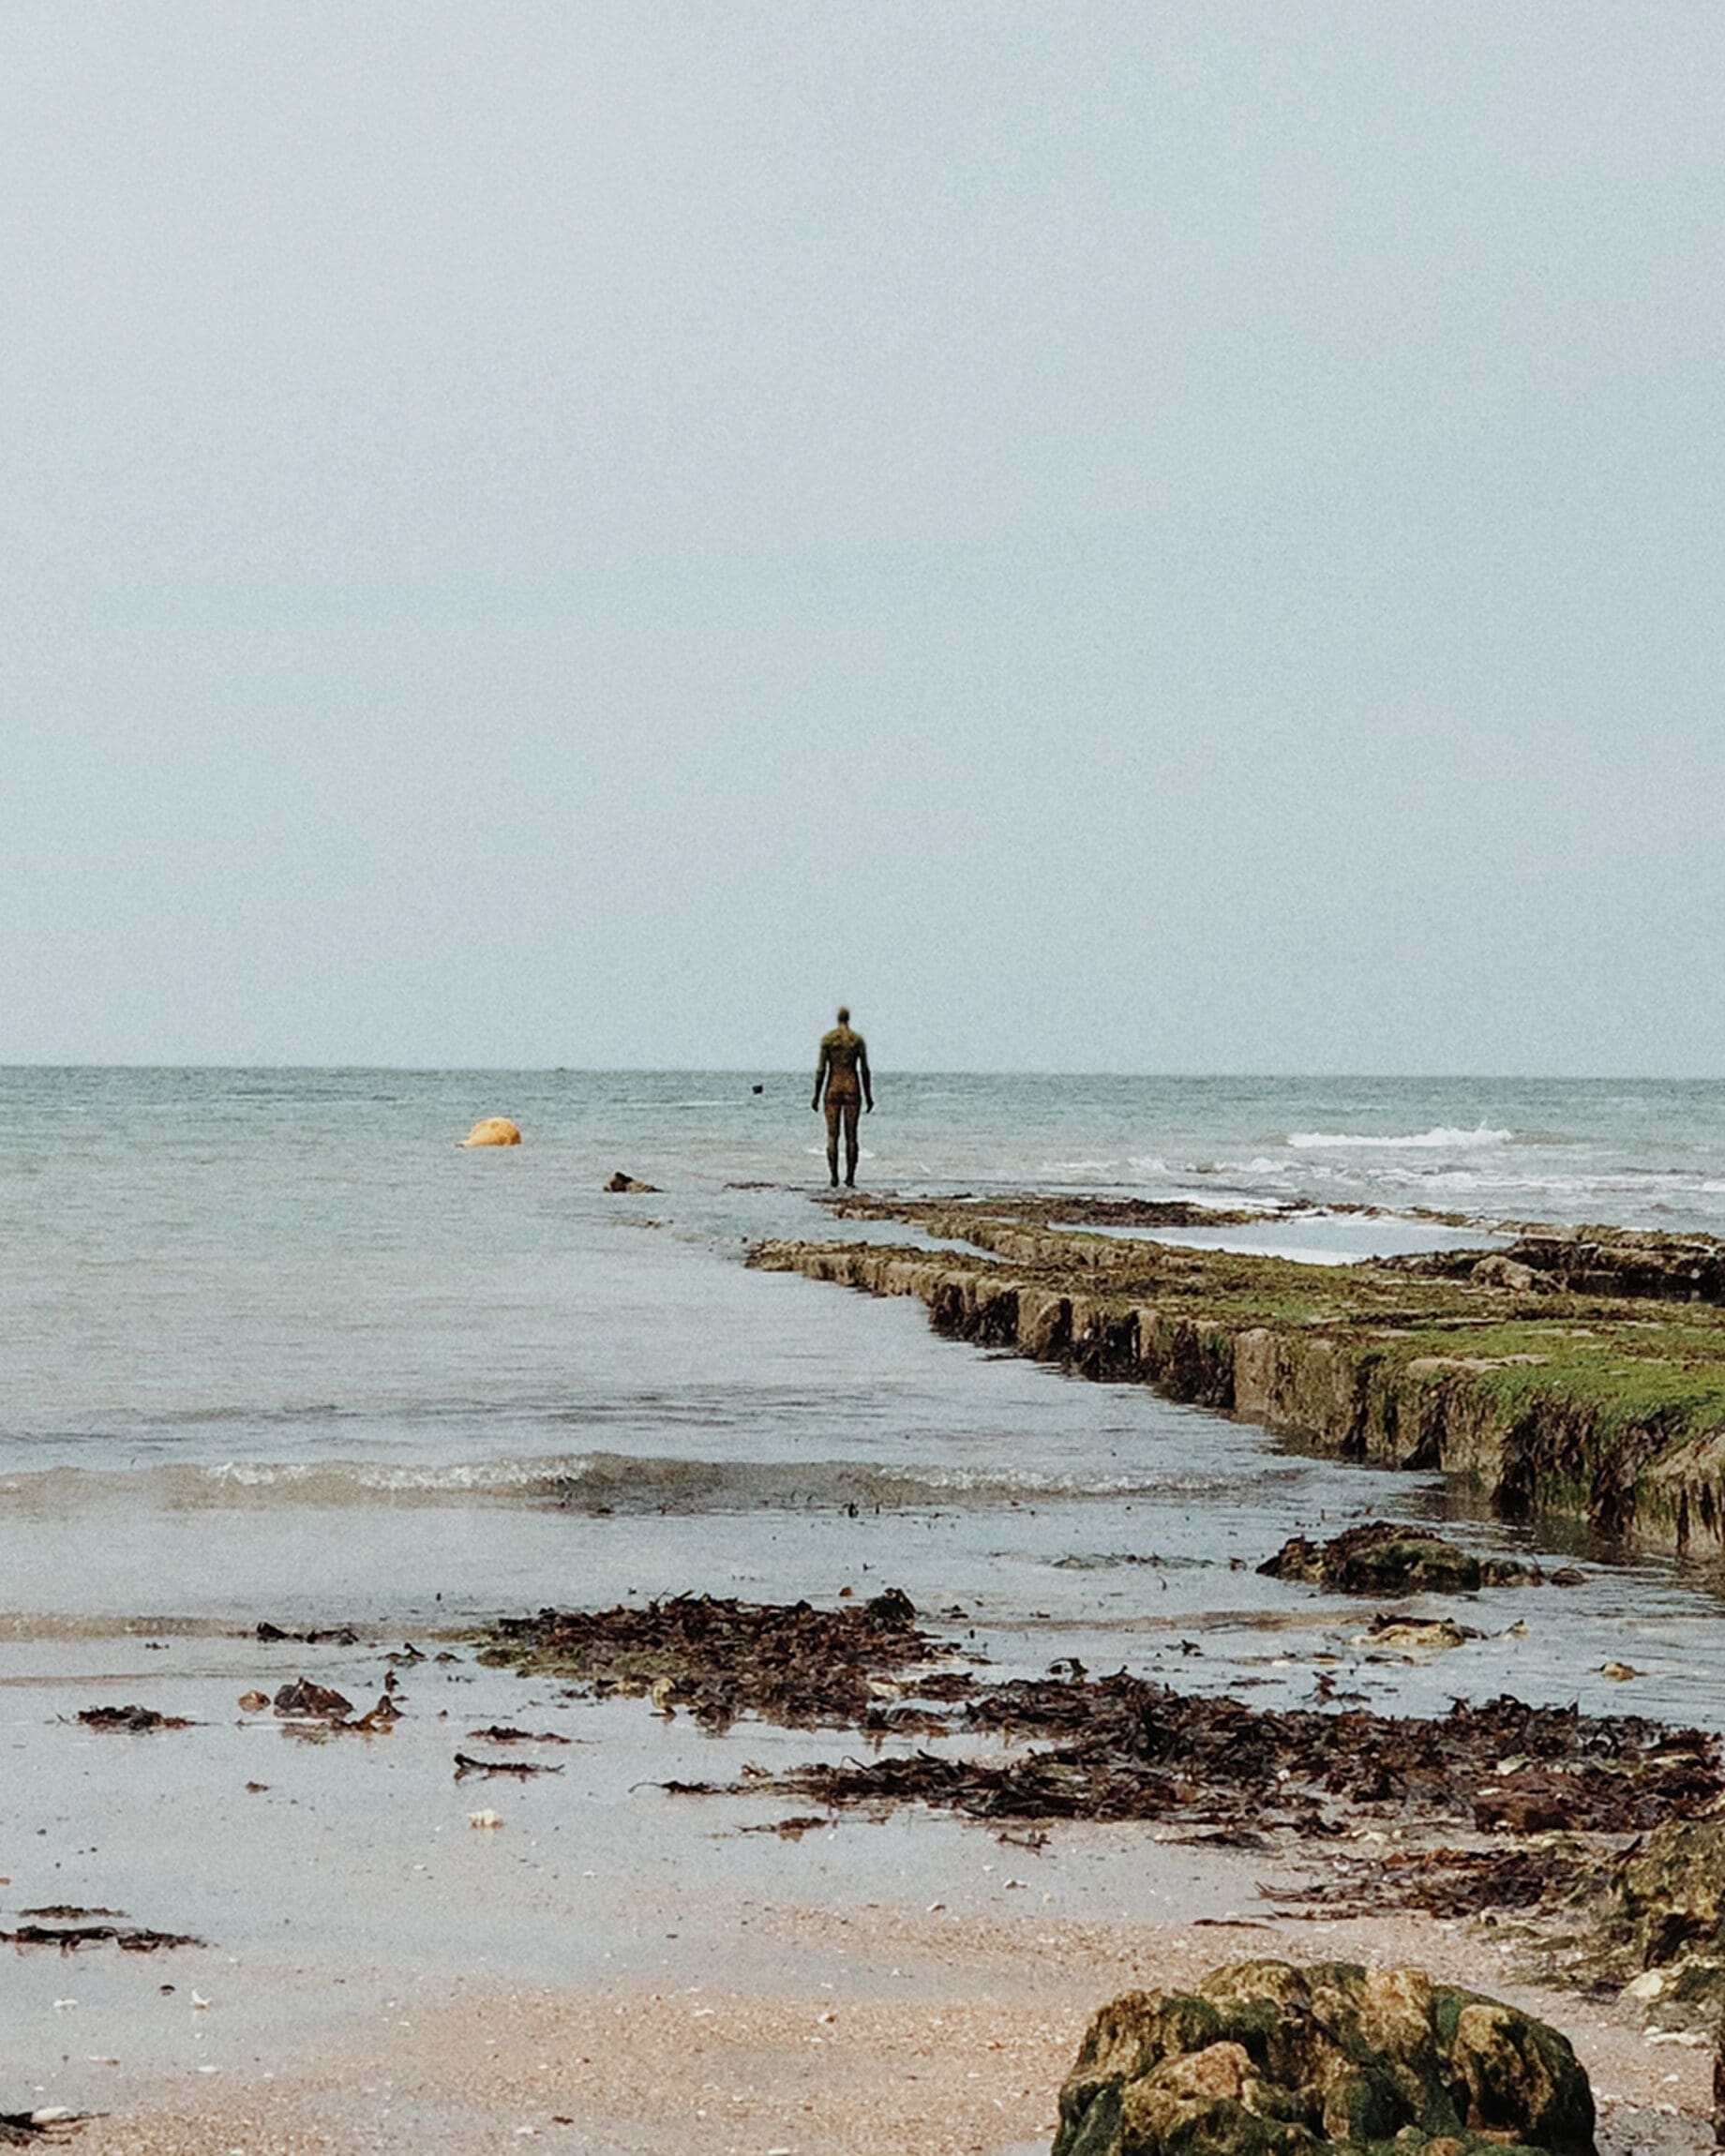 Kent Coastline | The Kent coastline with somebody standing at the edge of the water